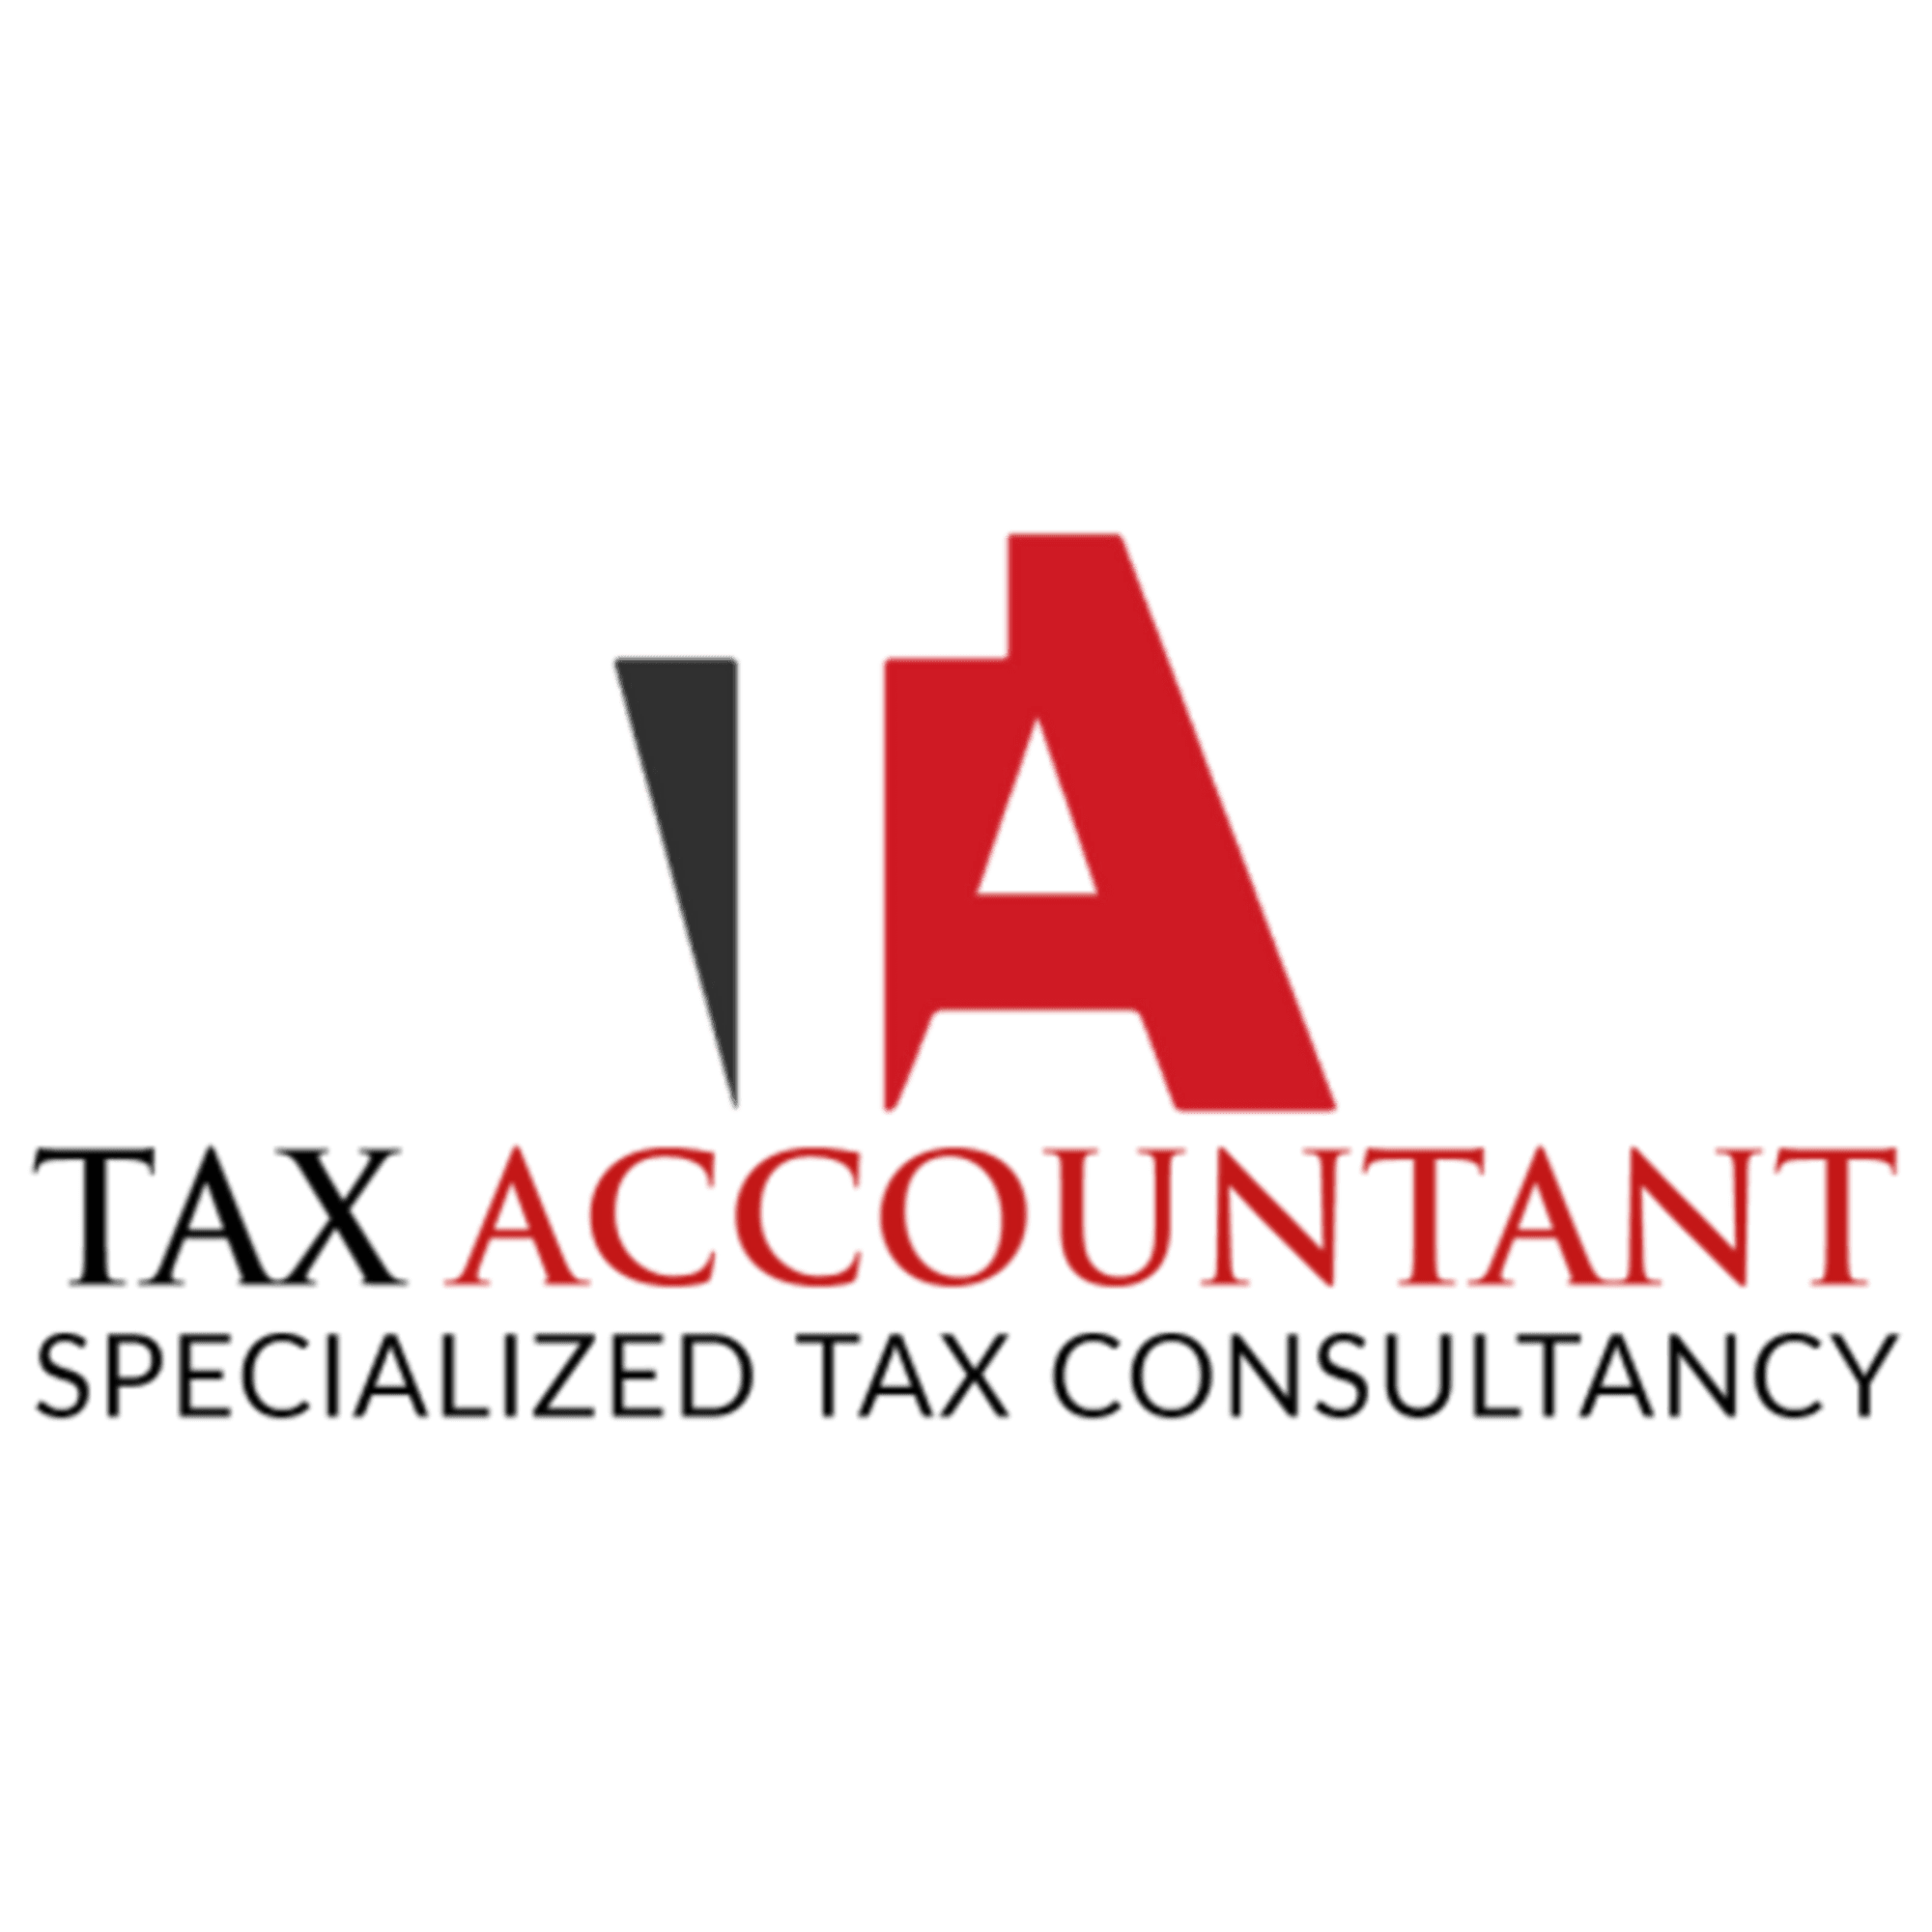 Tax Accountant - Specialist Tax Consultancy Logo